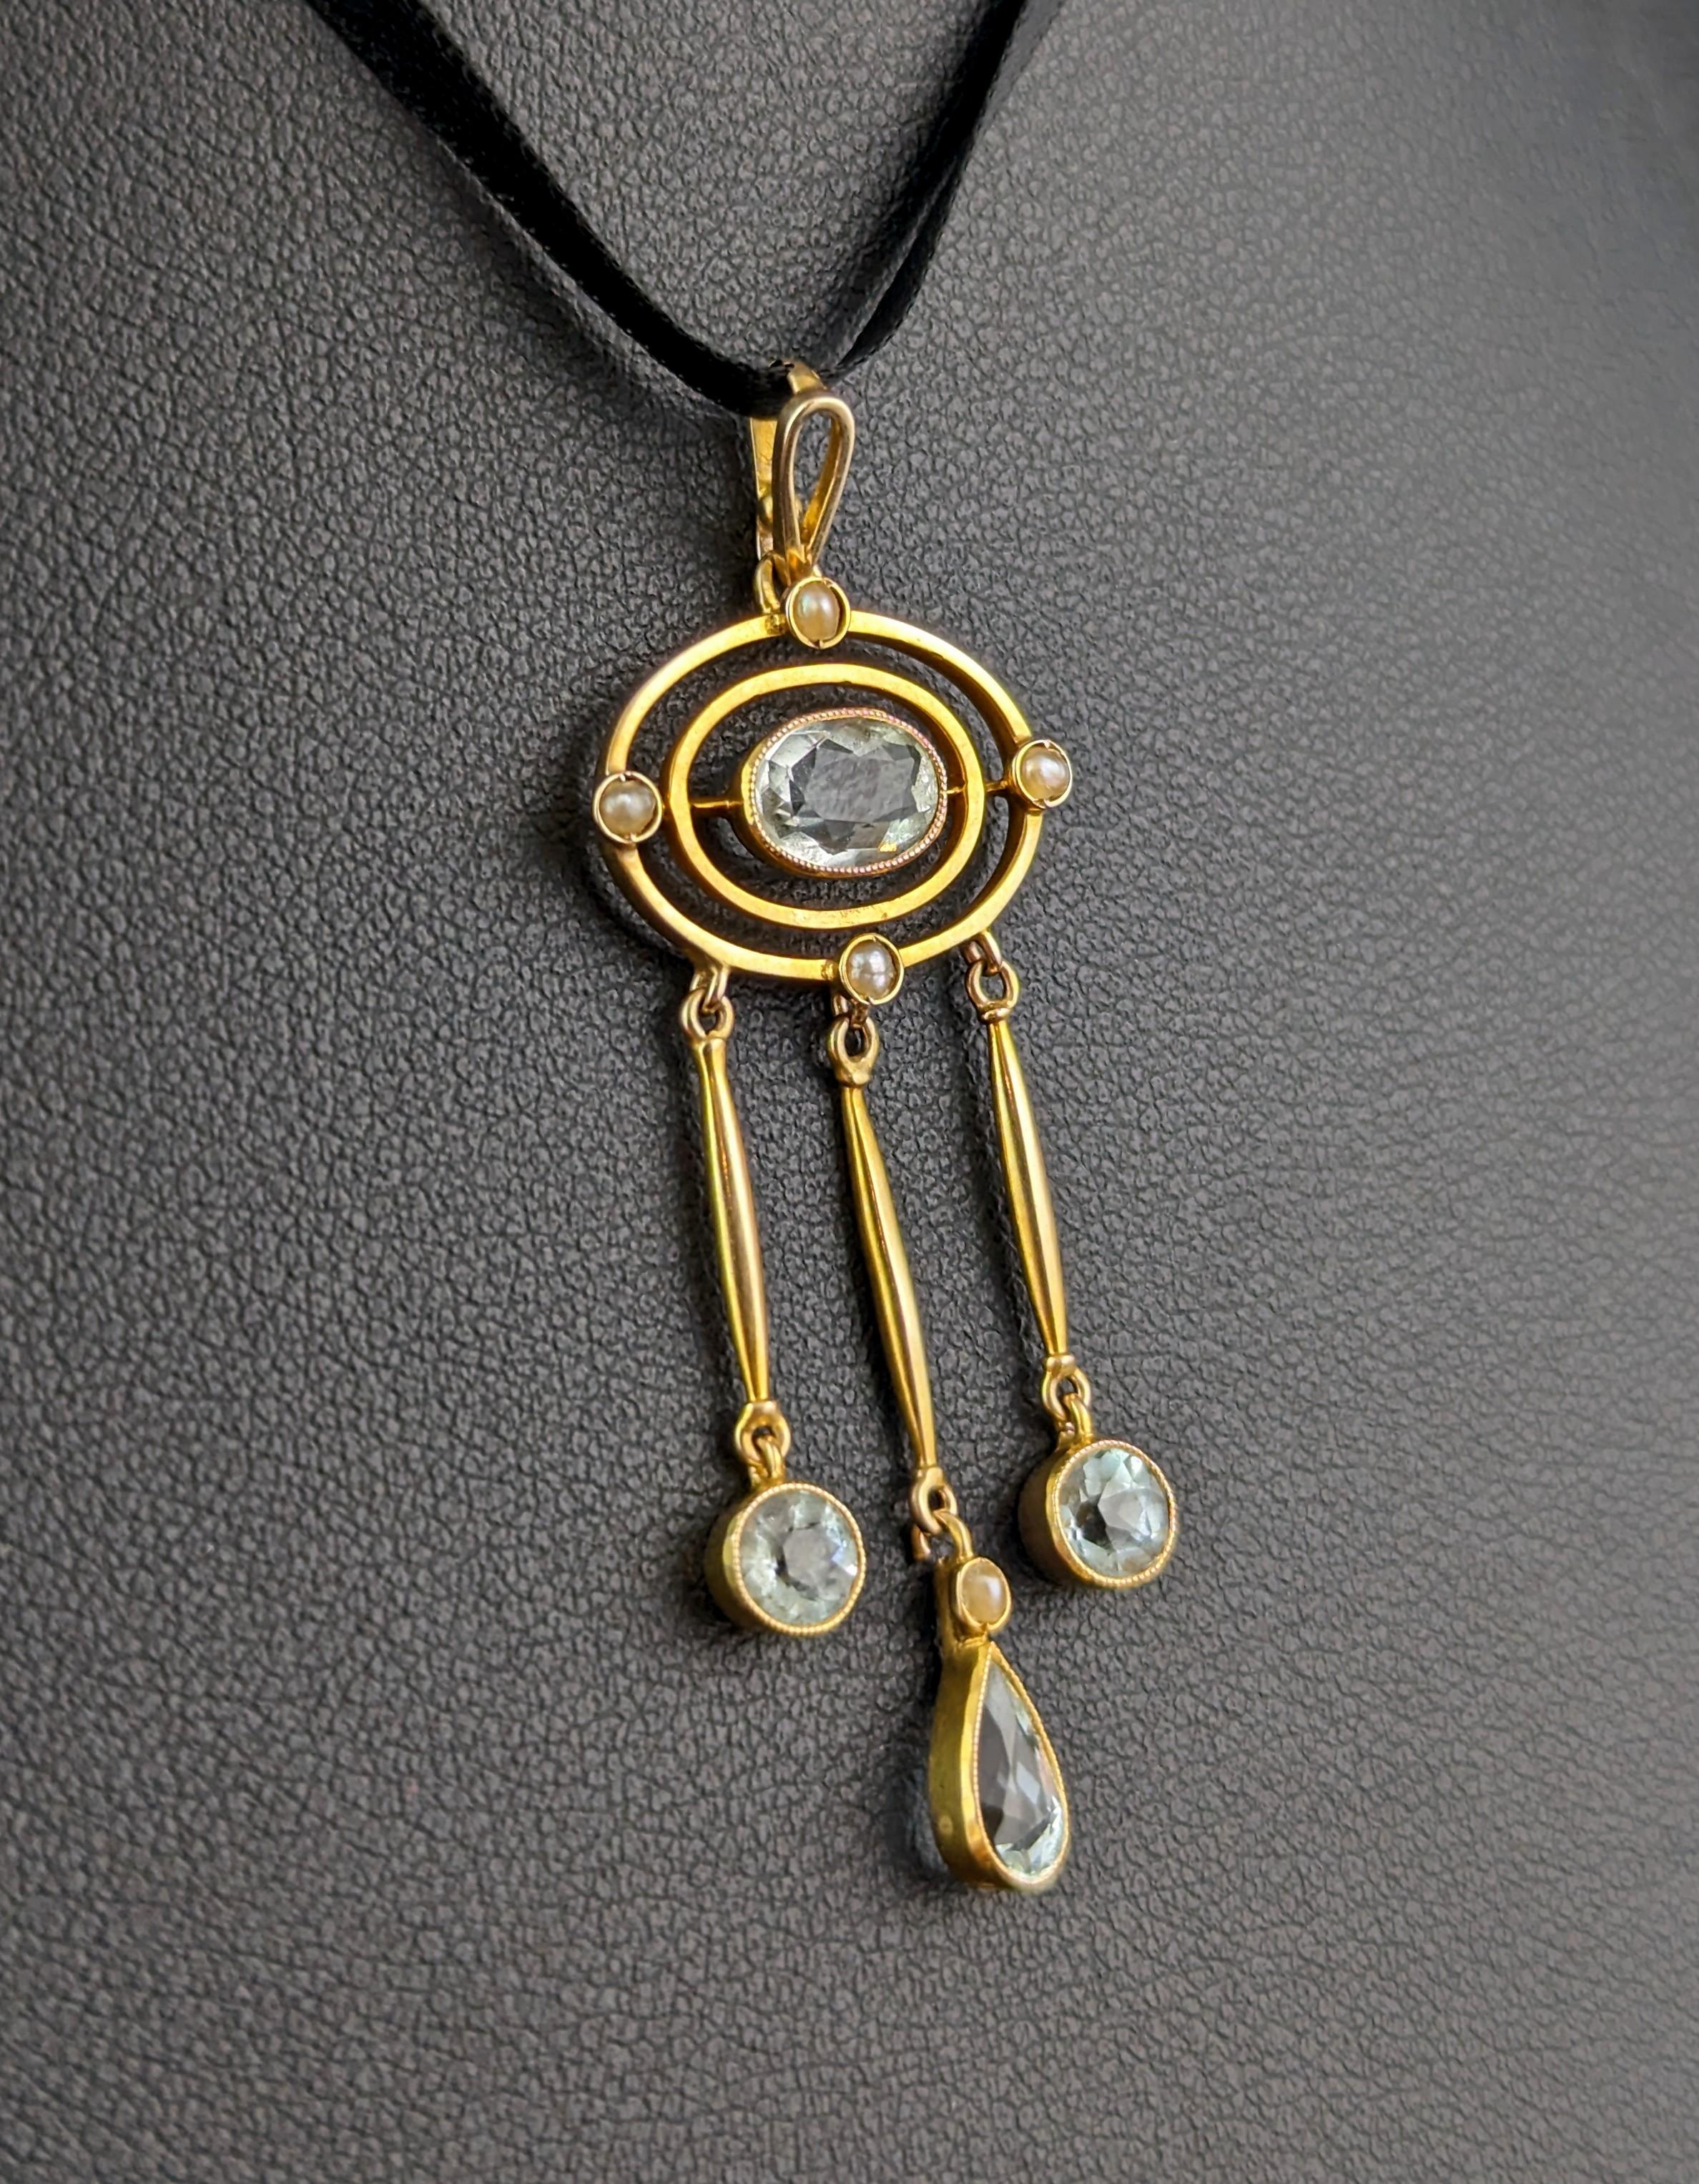 A truly stunning antique Aquamarine drop pendant.

Art Nouveau era this beautiful triple drop pendant emphasises clean lines and geometric shapes combined with delicate yet rich hues and different cut gemstones.

The pendant has an integral pearl